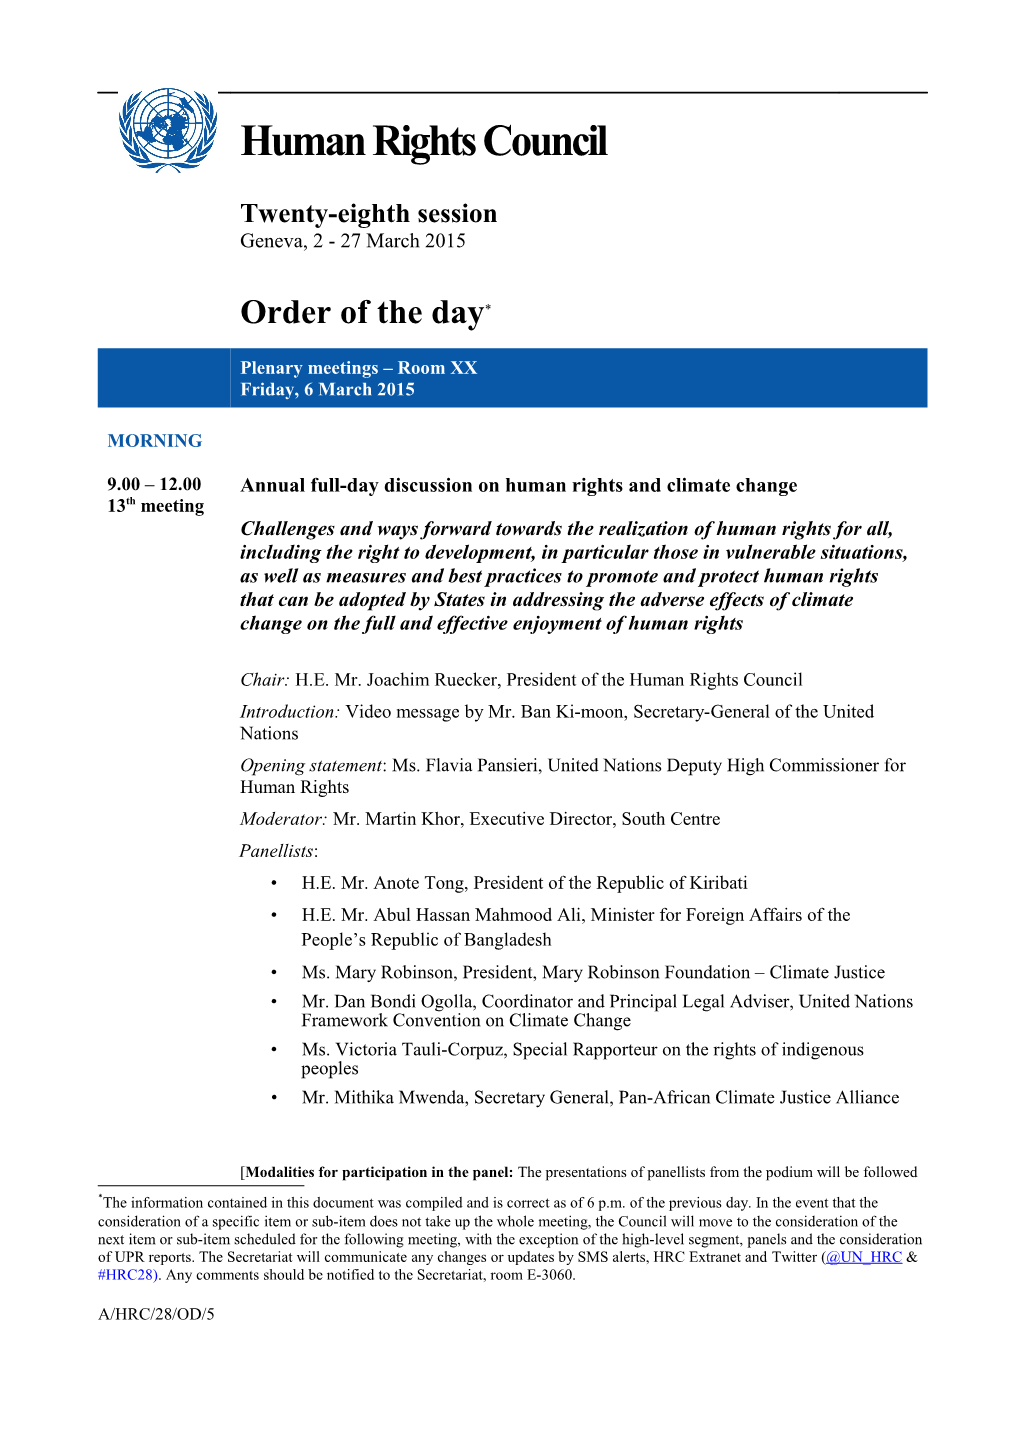 Friday, 6 March 2015, Order of the Day